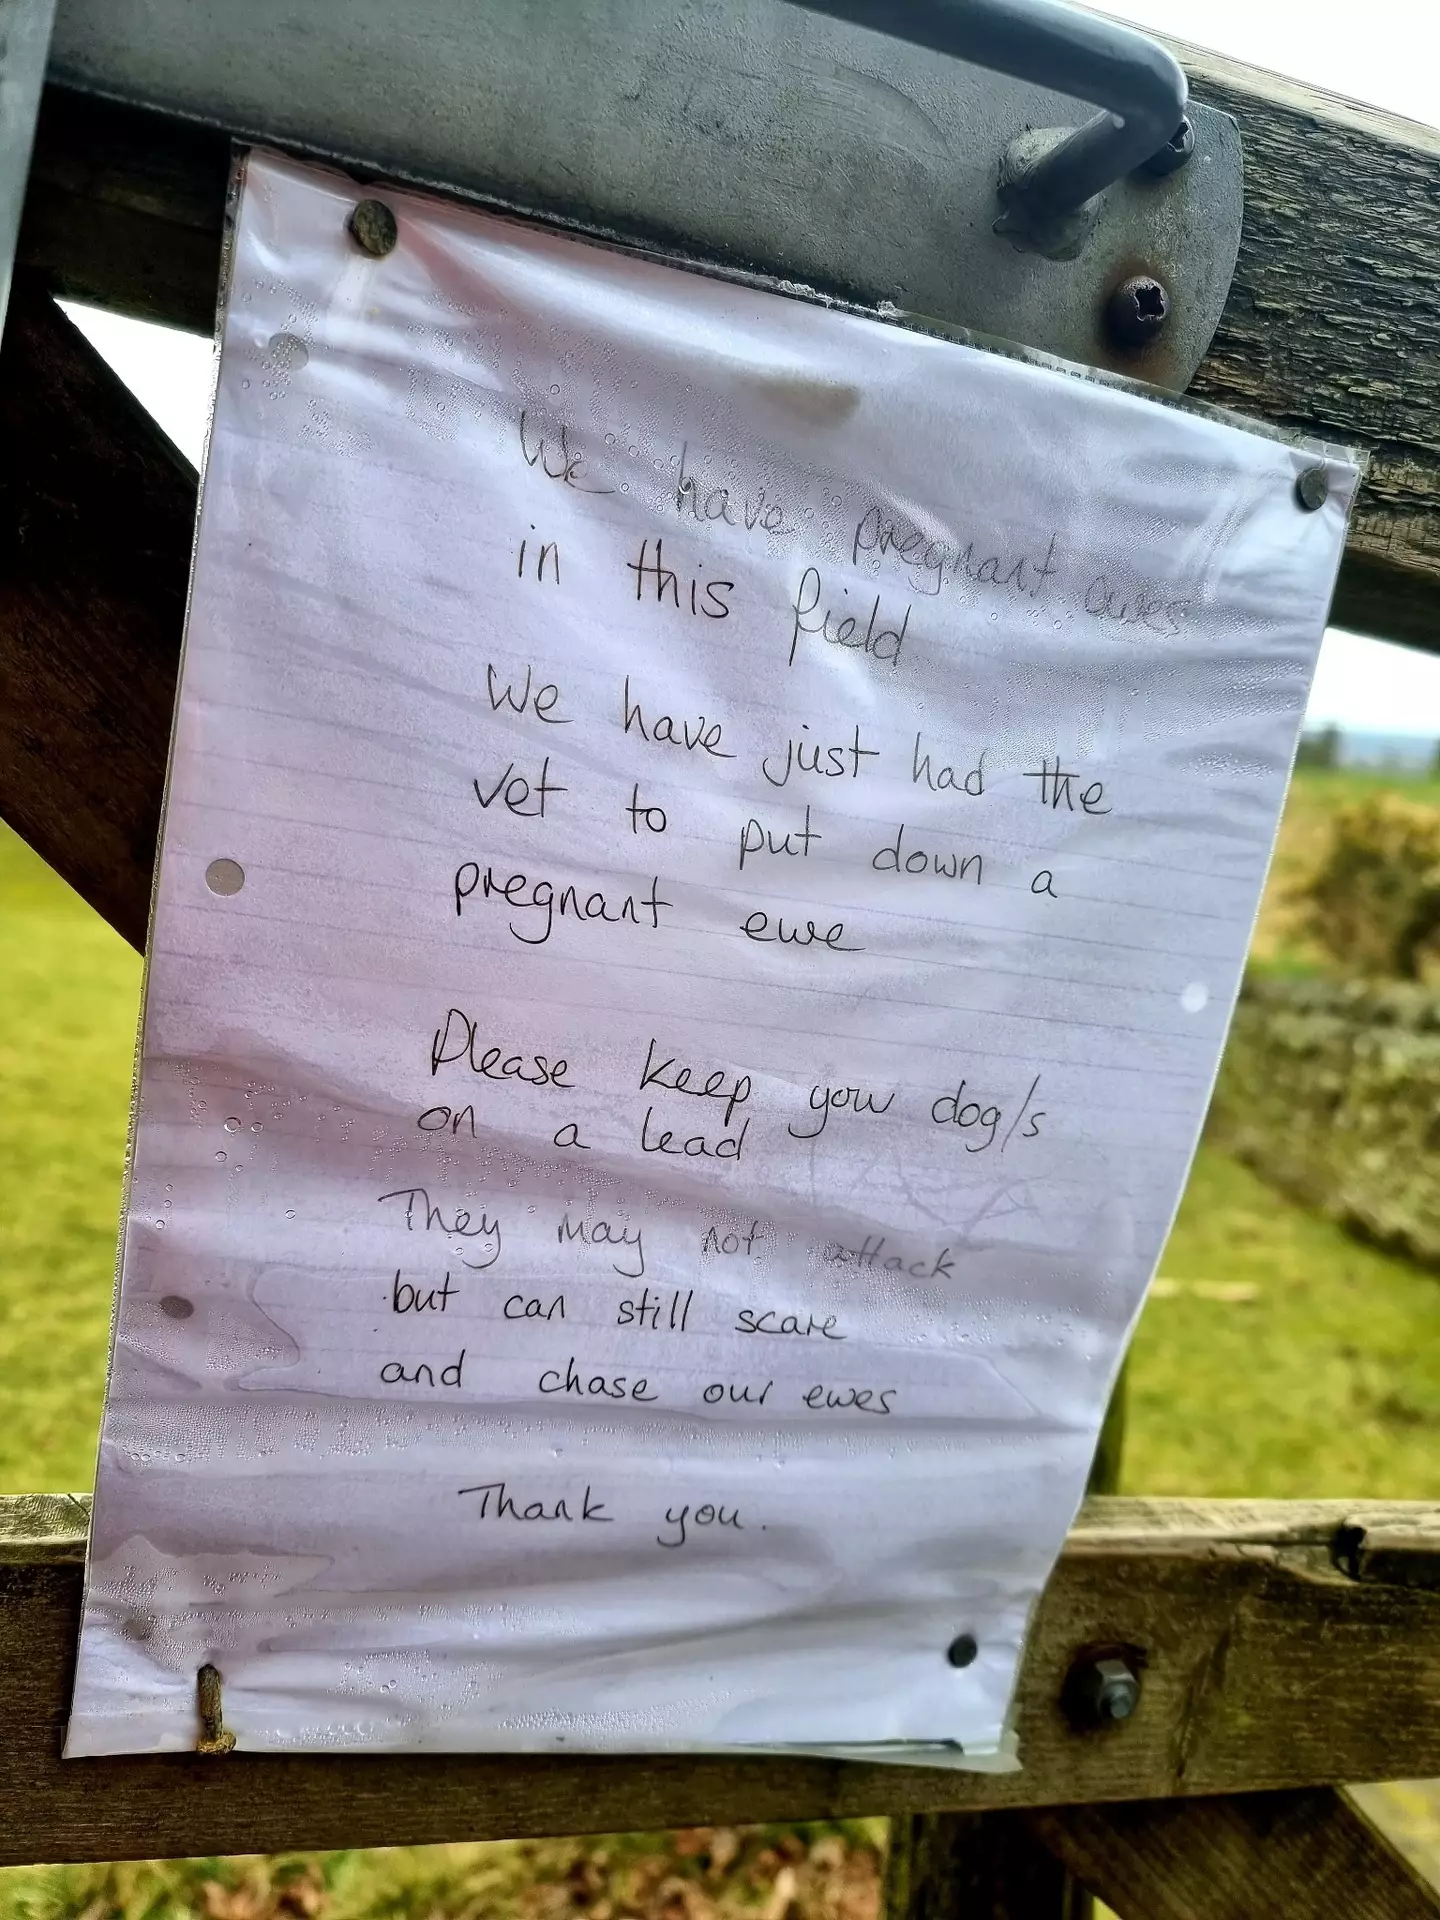 The note from a farmer to dog walkers.